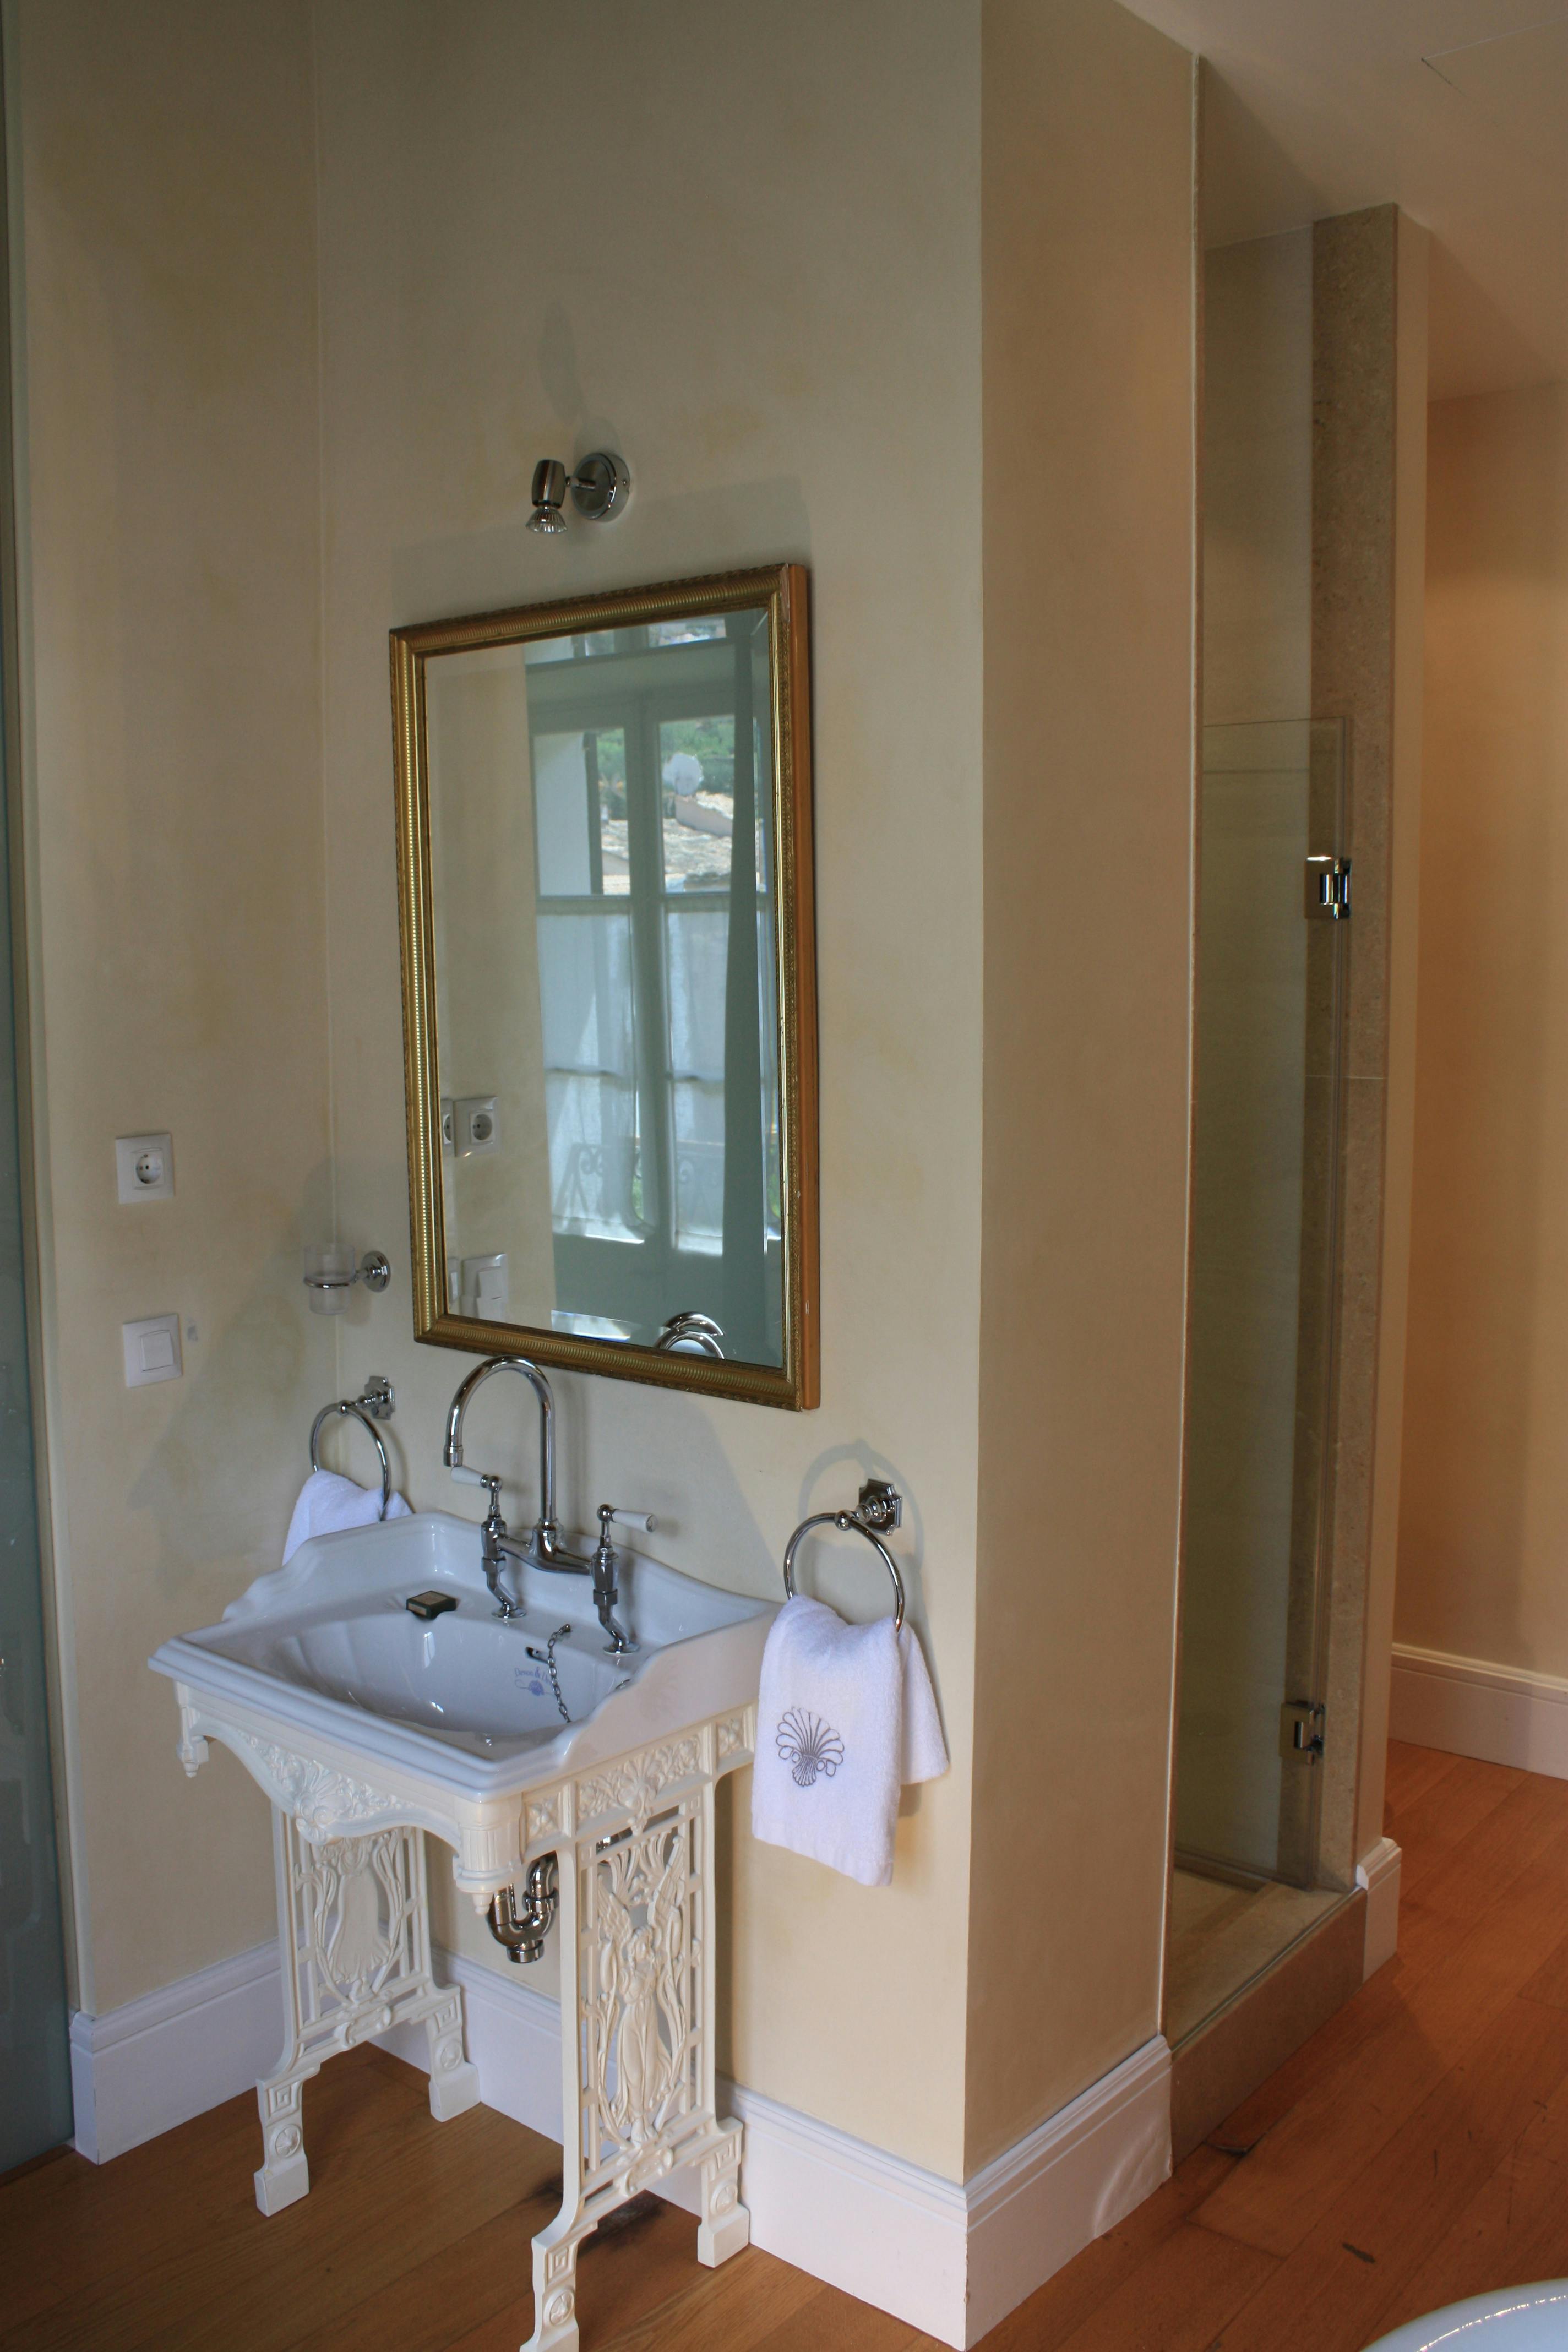 The antique sink within the Deia Suite bathroom